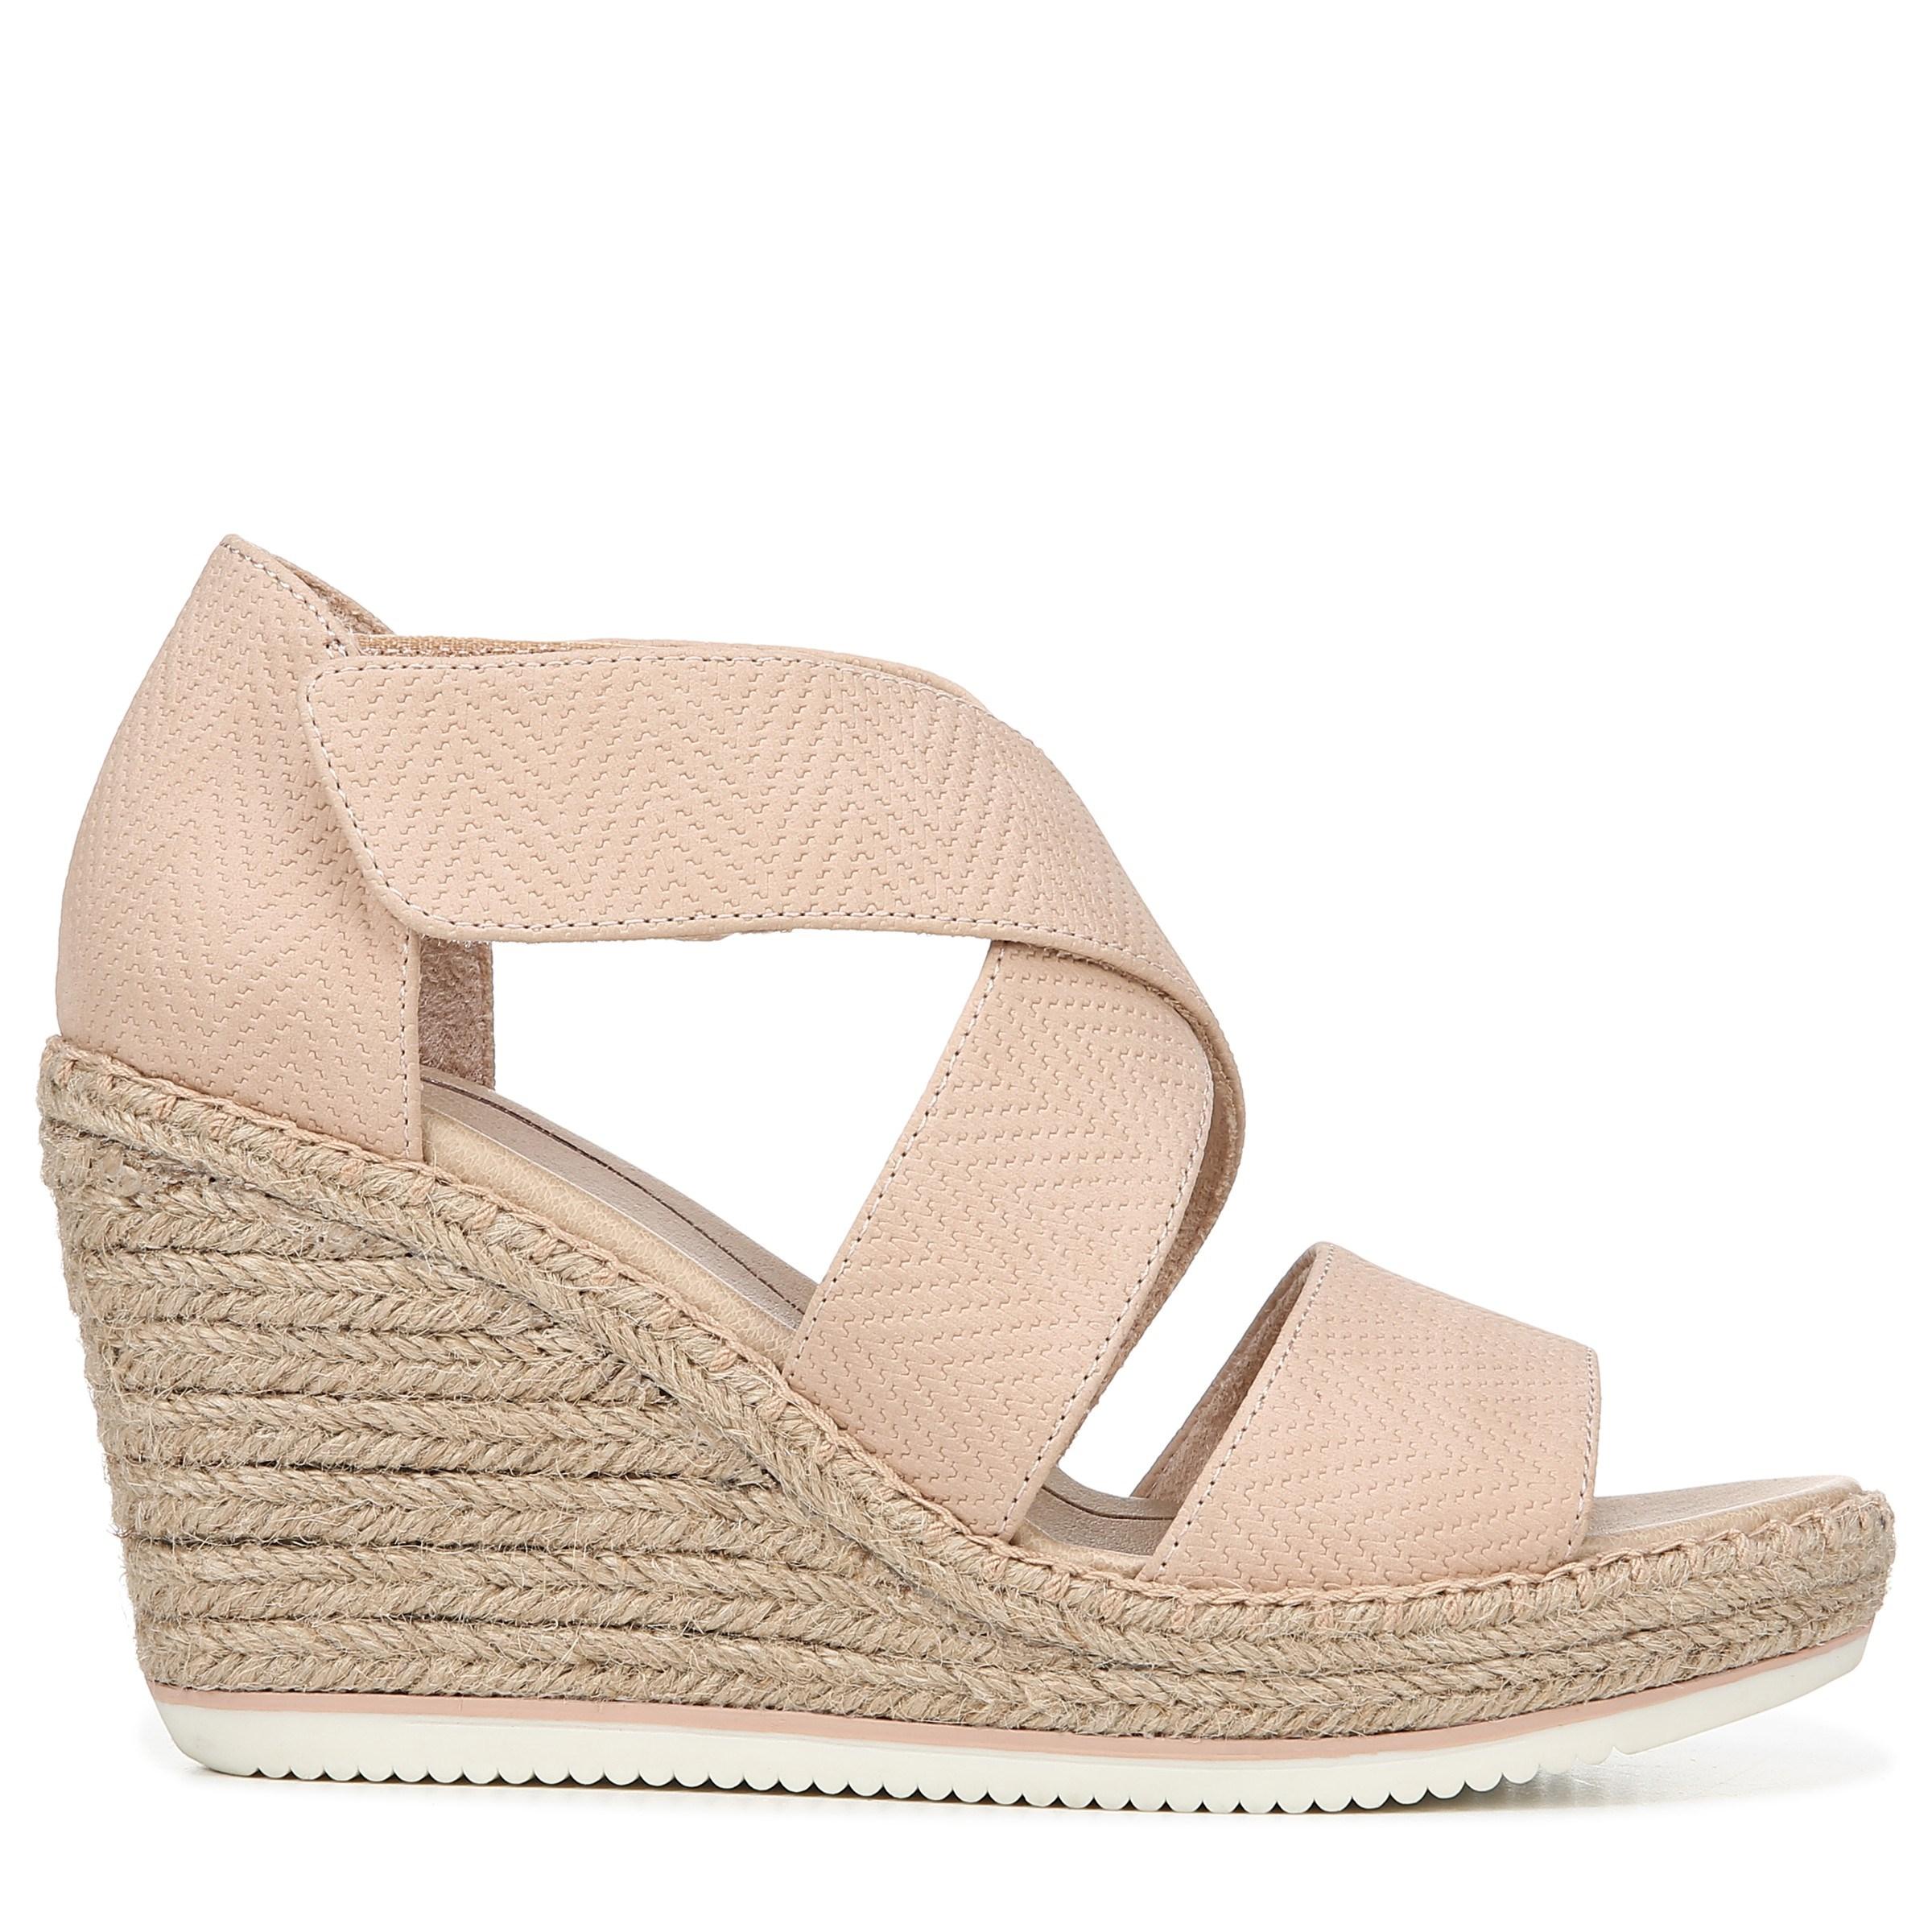 Dr. Scholls Vacay Wedge Sandals in Light Pink (Pink) - Save 63% - Lyst